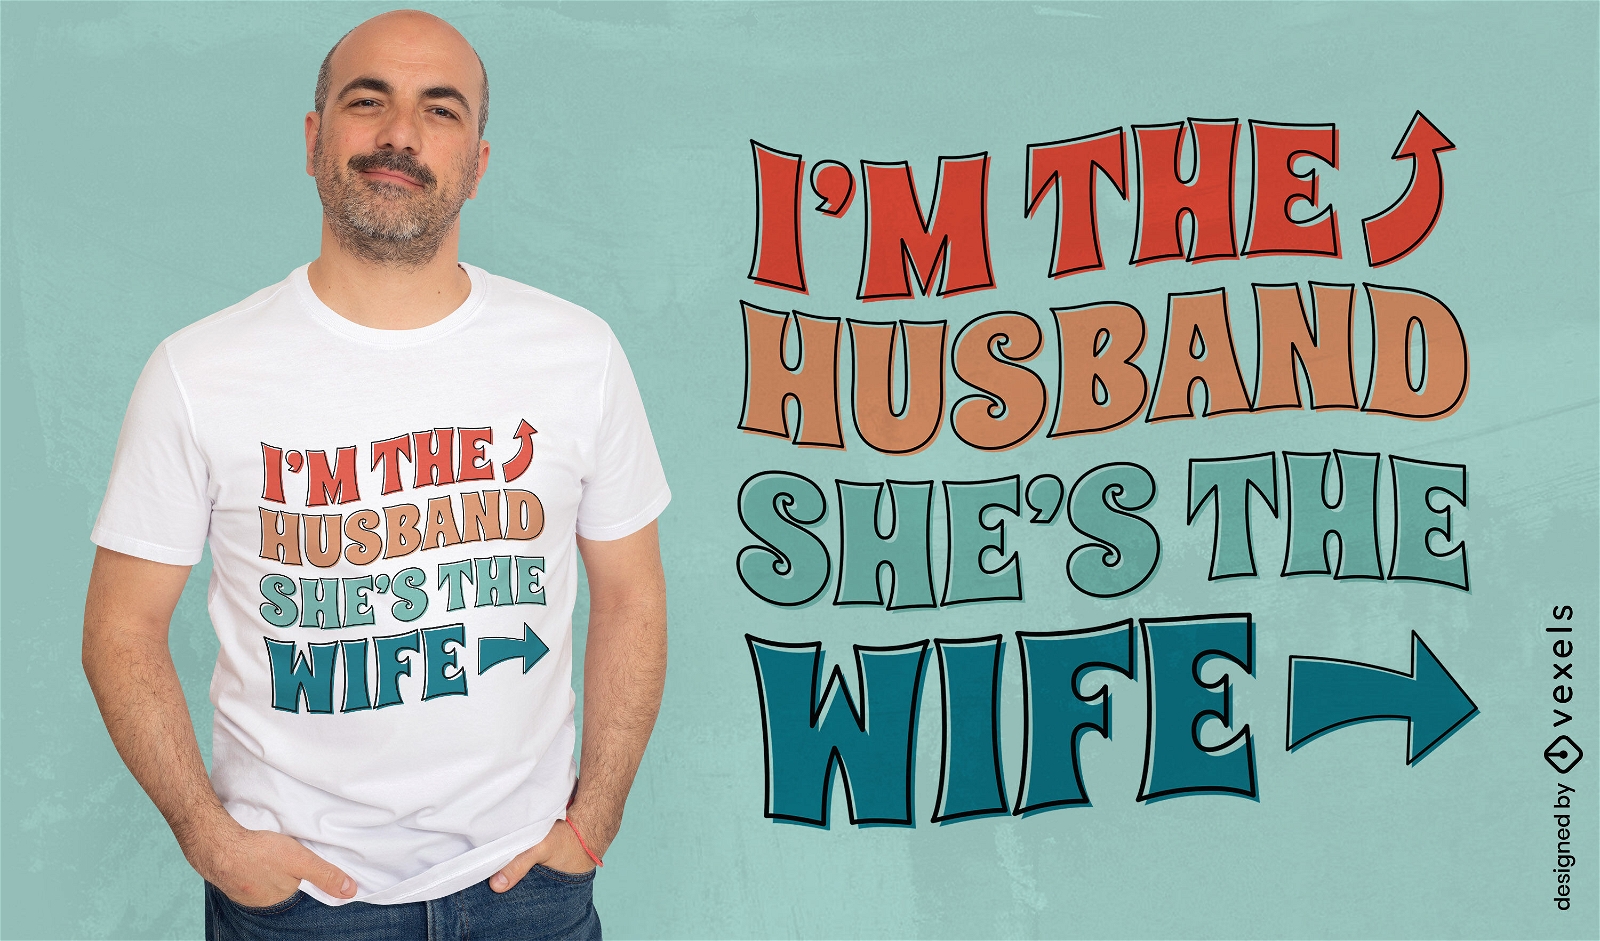 Husband and wife funny quote t-shirt design